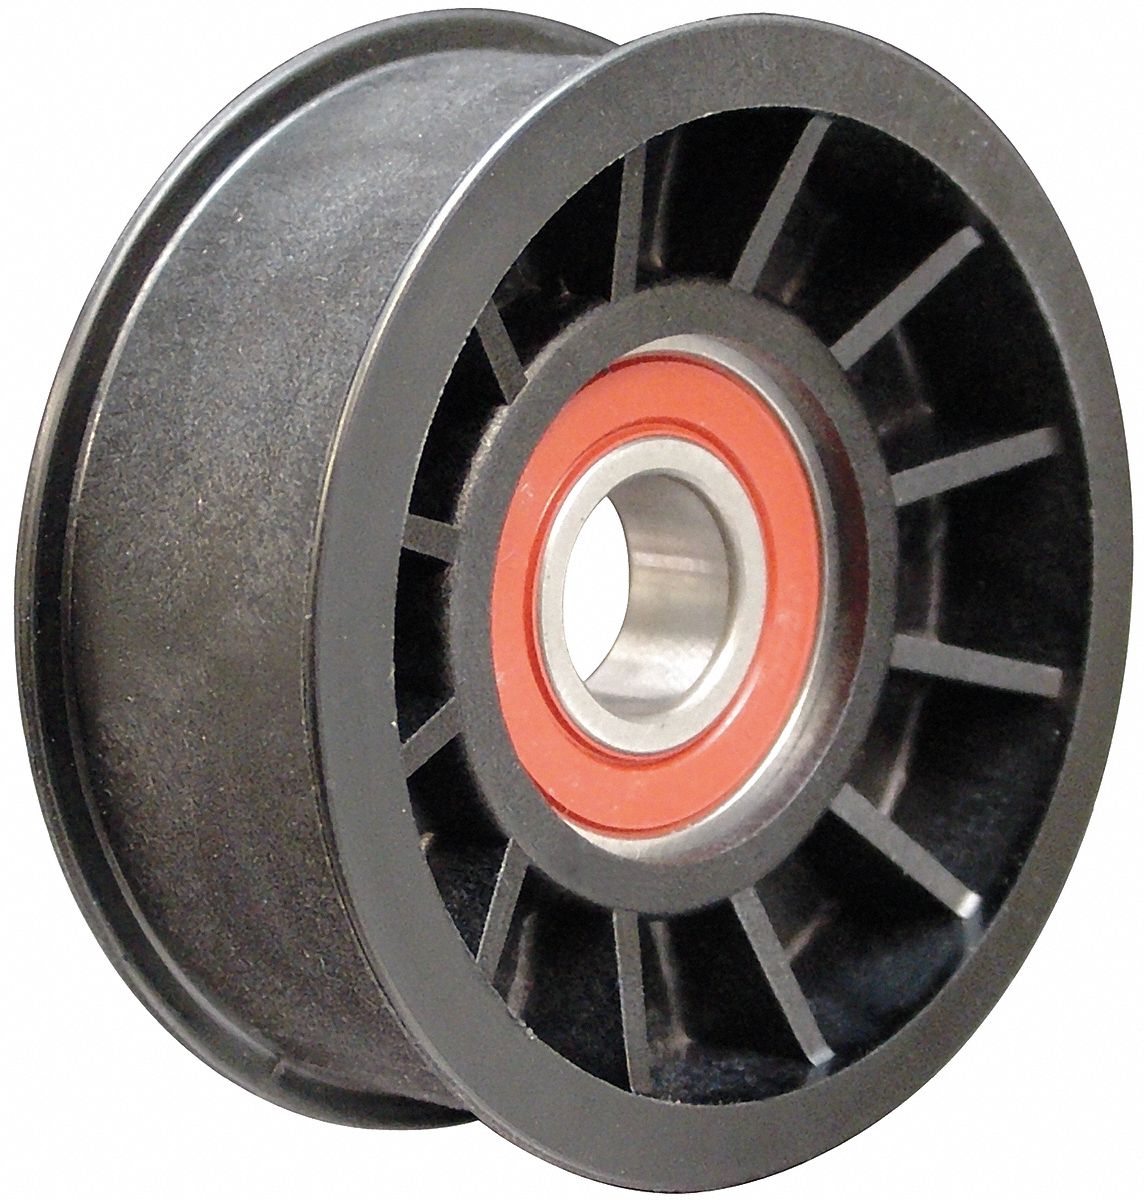 DAYCO Automotive Belt Tensioners and Tension Pulleys - Grainger 